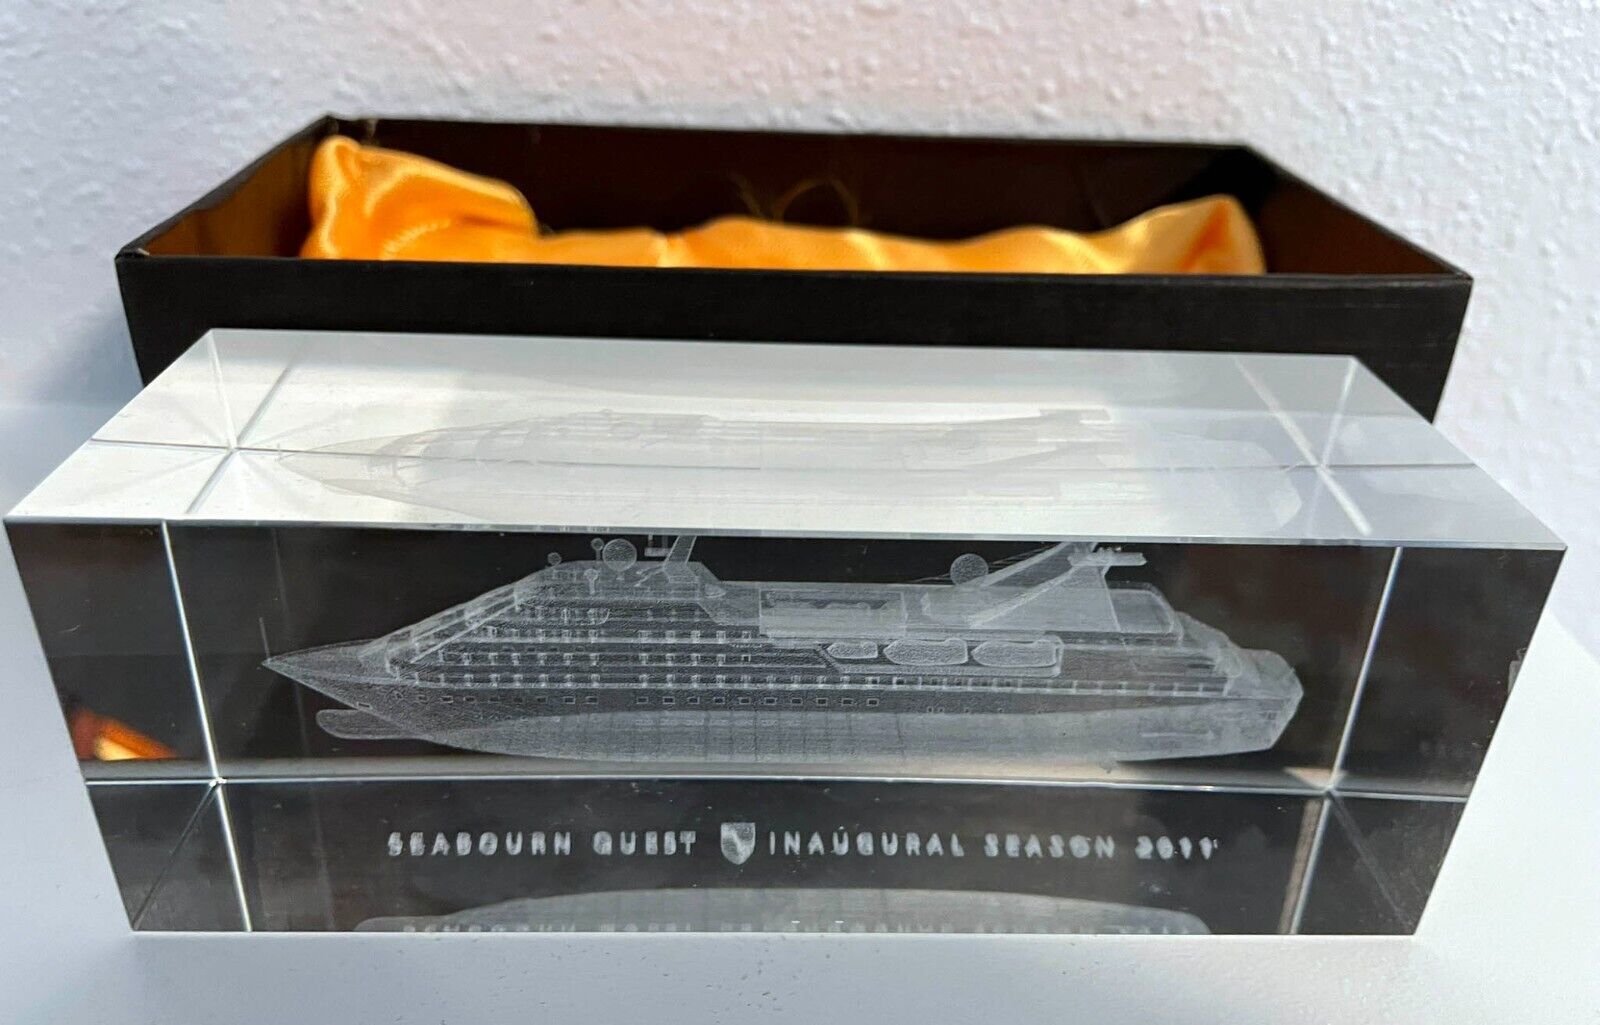 Seabourn Quest 2011 Inaugural Season Commemorative Etched Crystal Paperweight